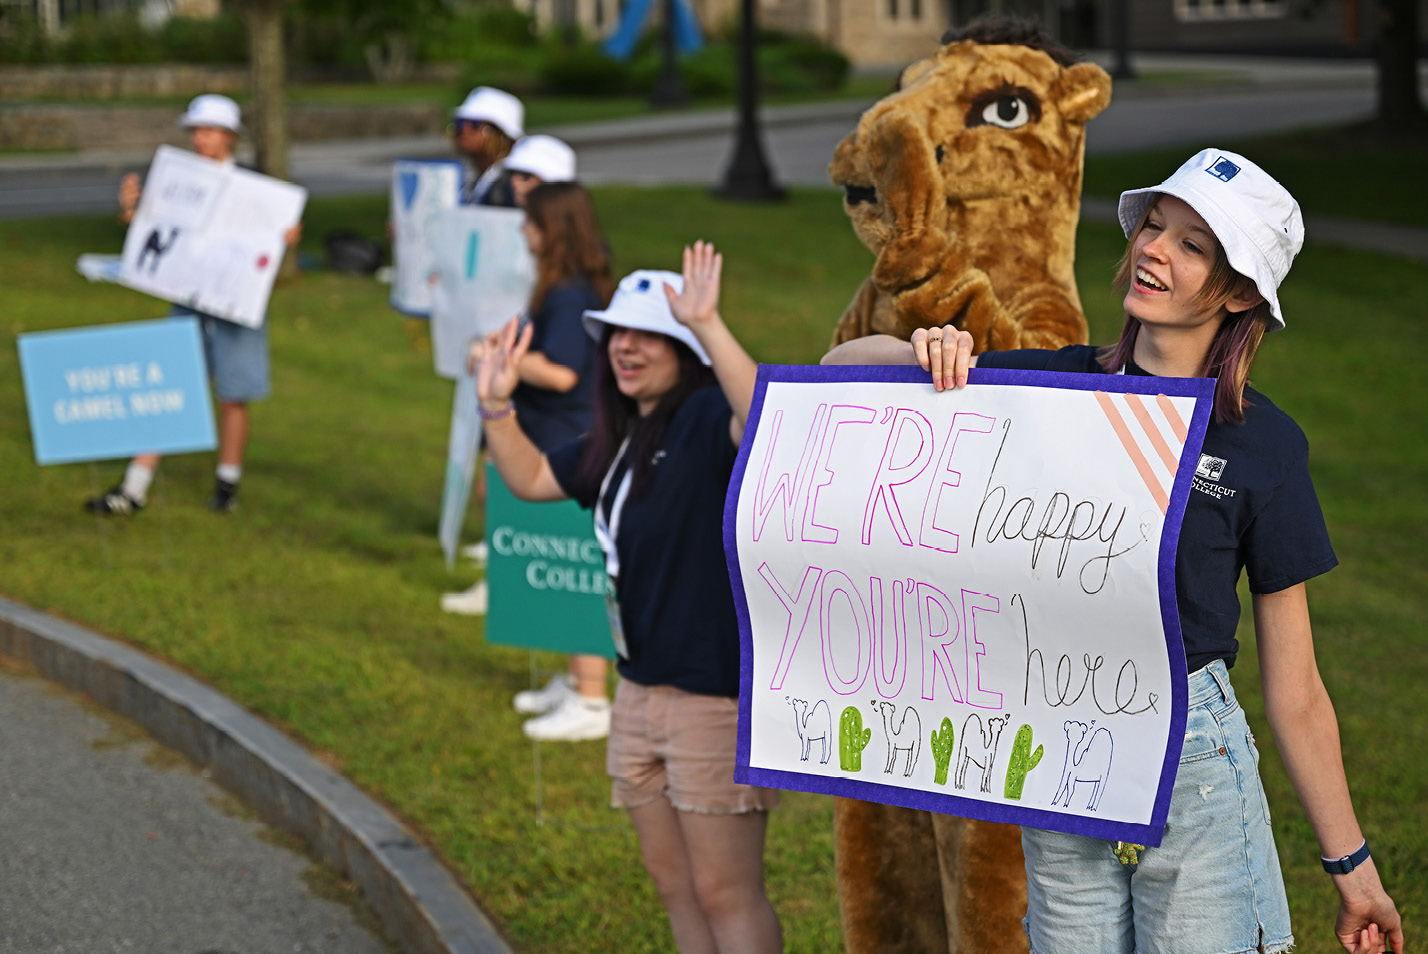 The camel mascot and other helpers welcome new students to campus.